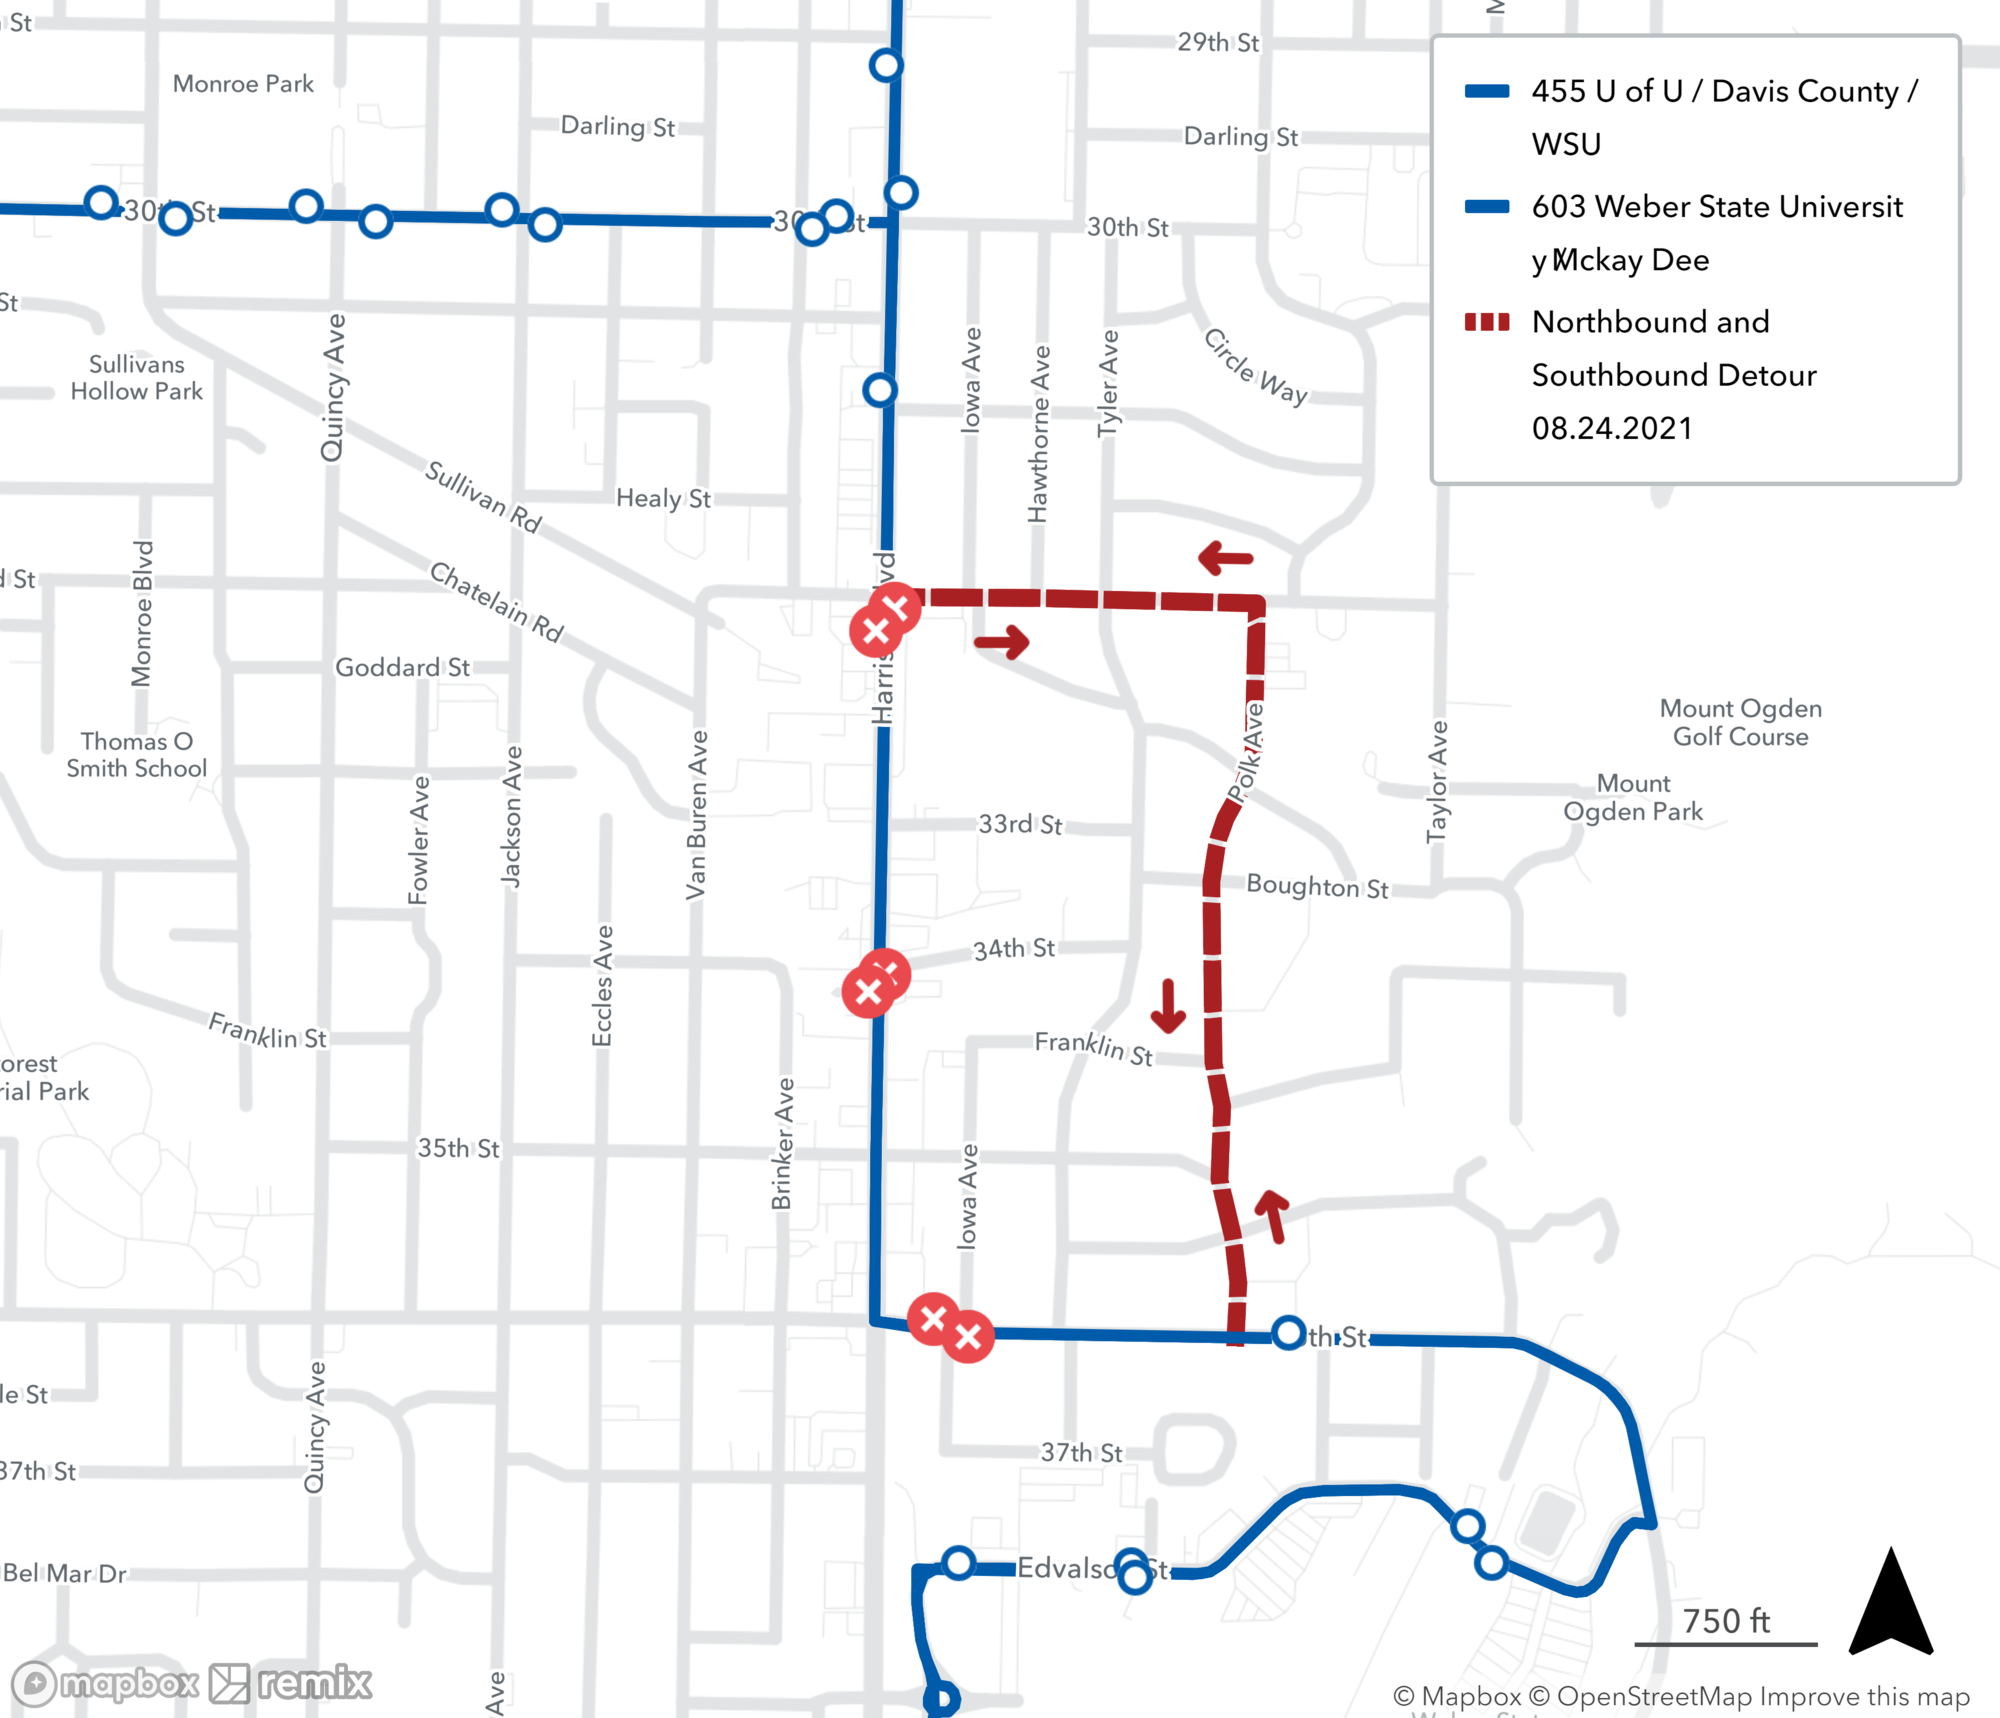 Routes 455 and 603 on Detour